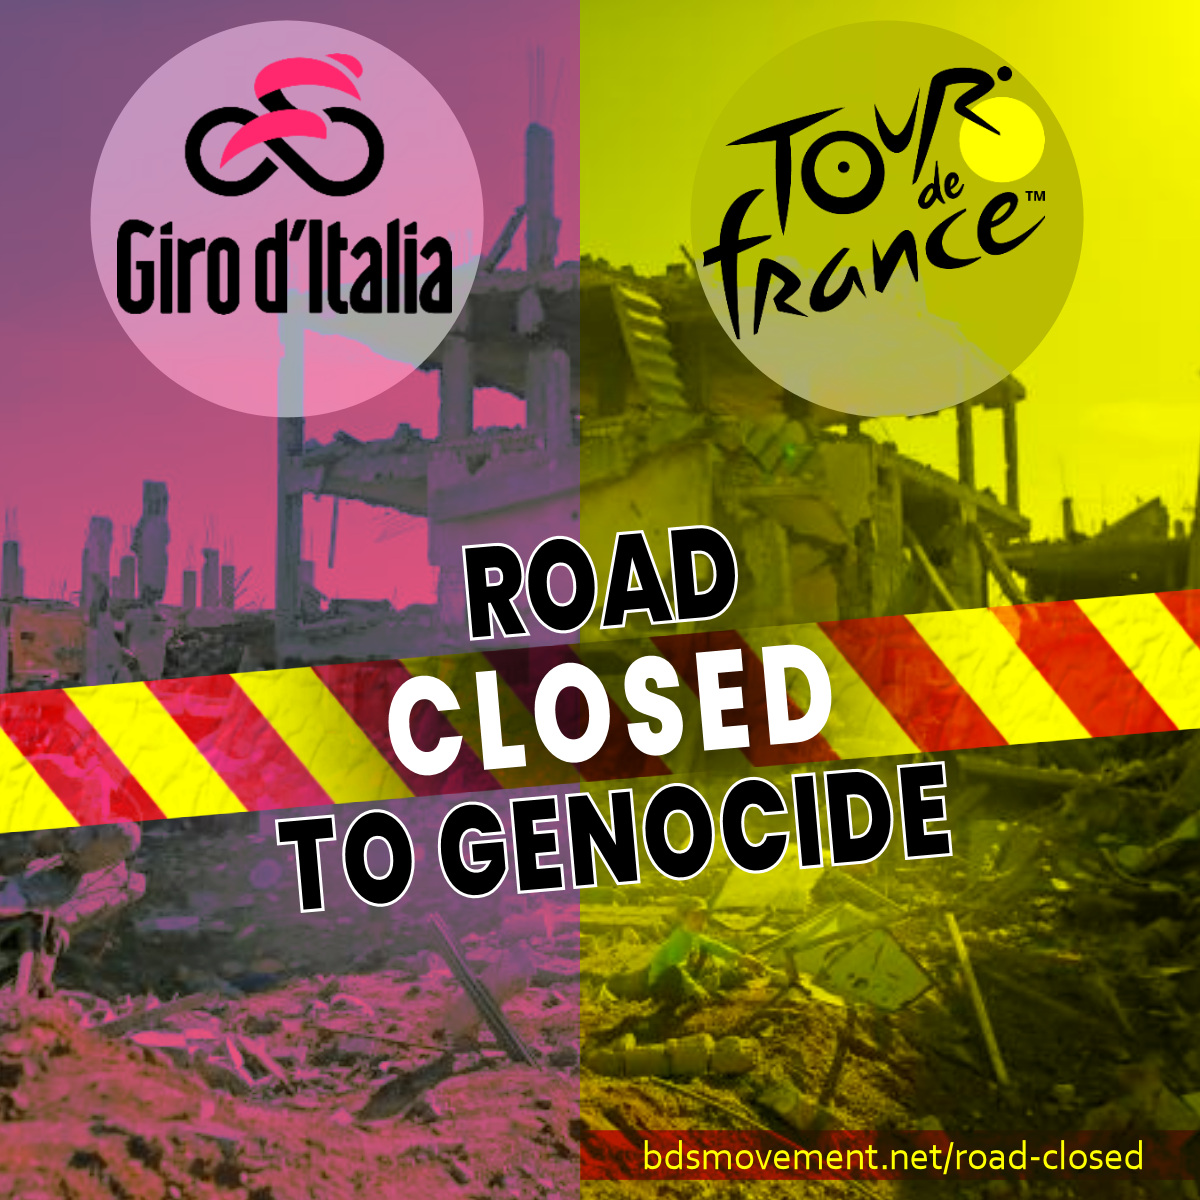 Palestinians call for more protests than ever against participation of Israeli gov-sponsored team in the @girodItalia & @letour de France cycling races. Make sure the road is closed to genocide. loom.ly/7ElbhAI #GazaGenocide #RoadClosedToGenocide #GirodItalia @TDF2024